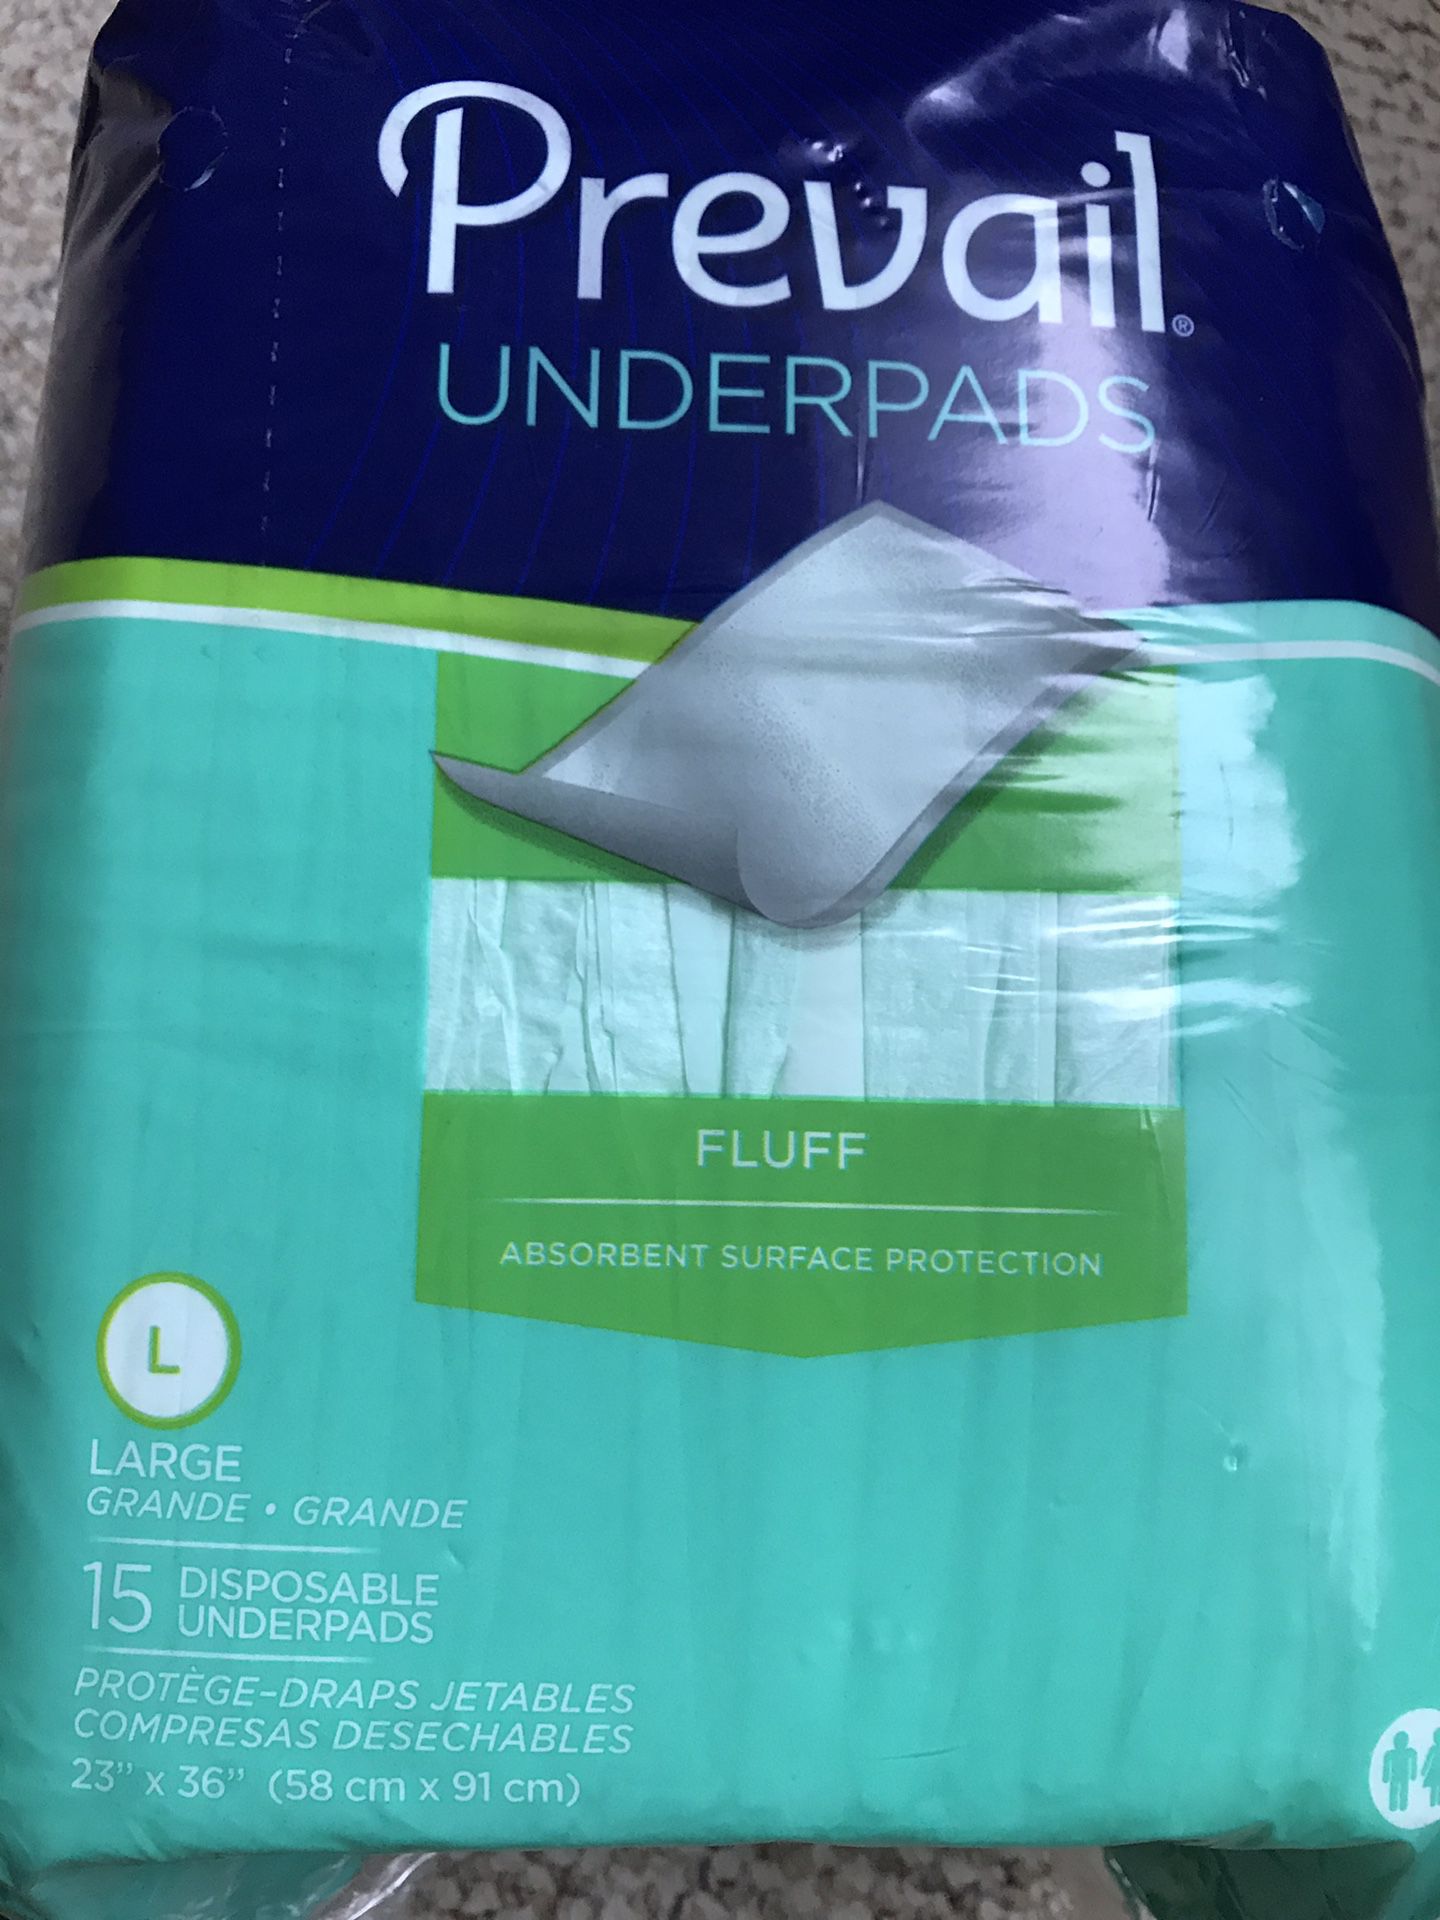 Underpads for Adults, Children or Pets